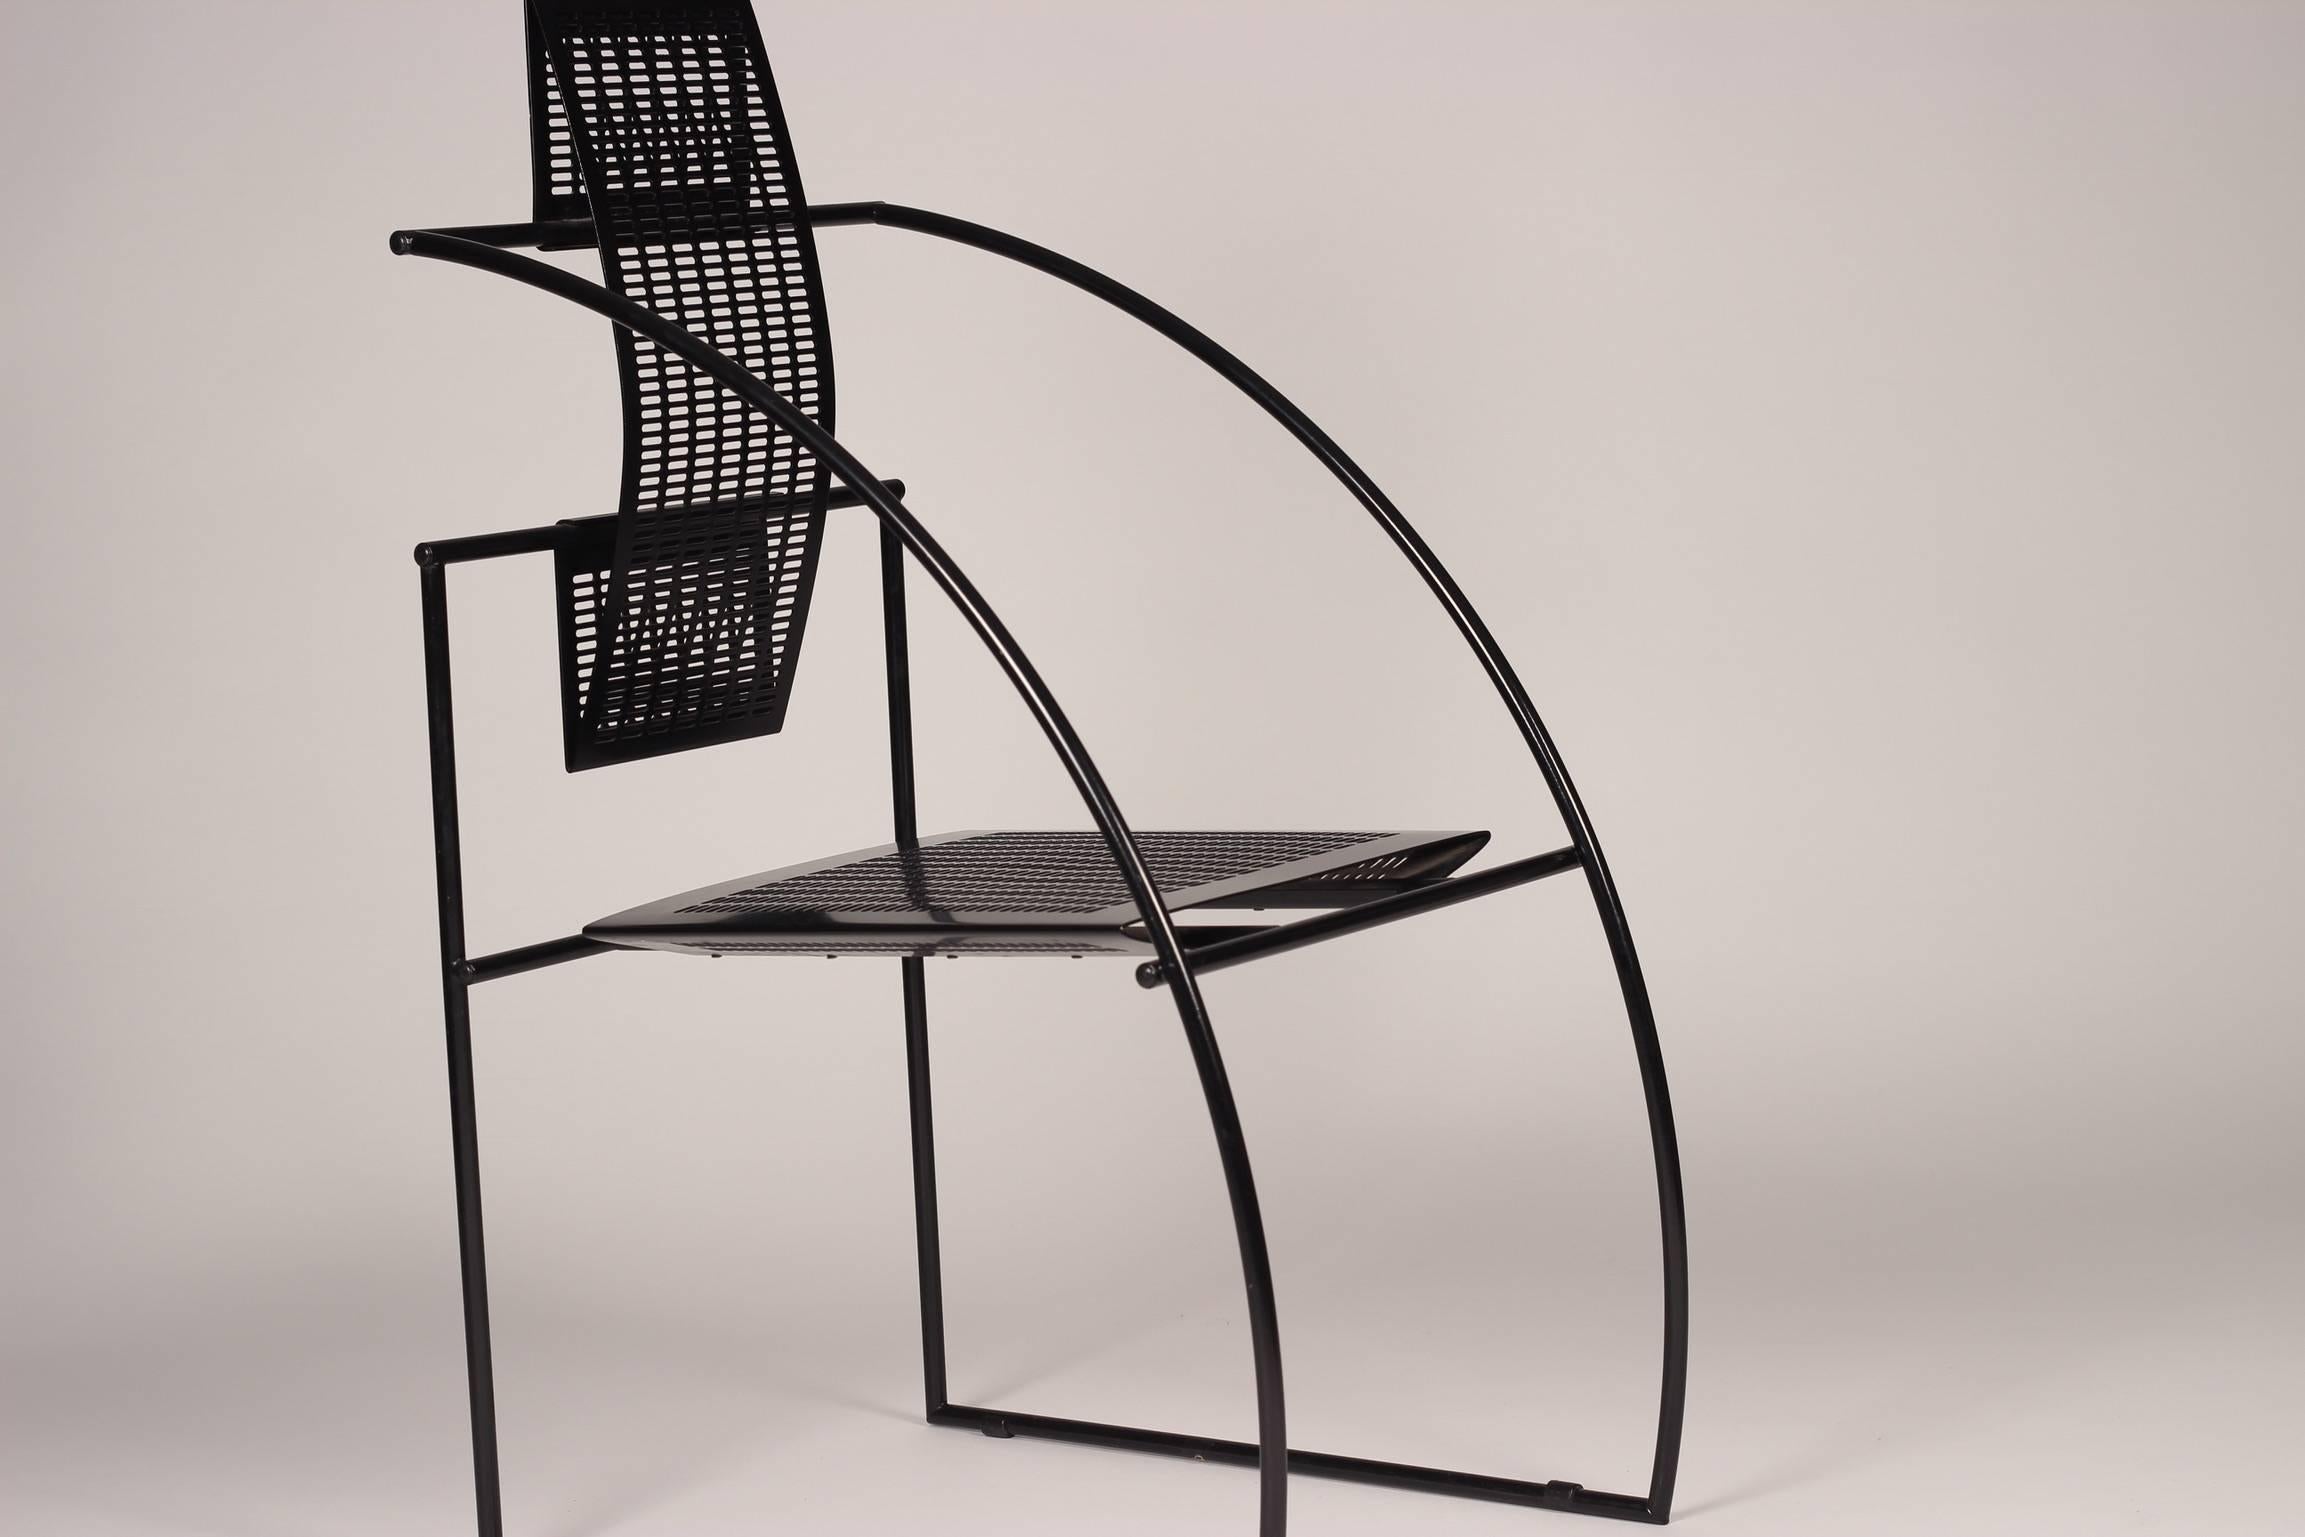 The Quinta chair by Italian architect and designer Mario Botta is constructed of a steel rod frame and perforated steel to form the seat and back.